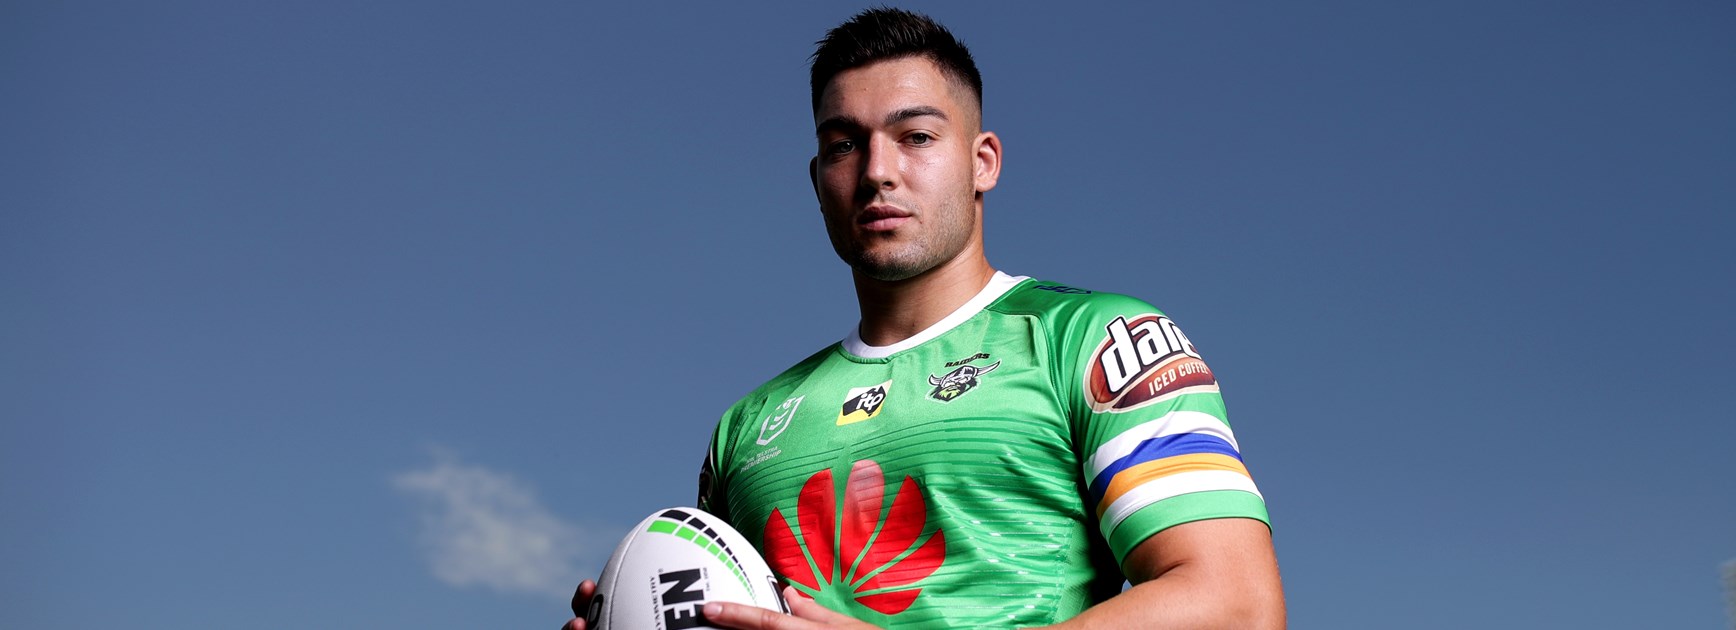 Finals rookie Cotric keen to add NRL title to enviable resume